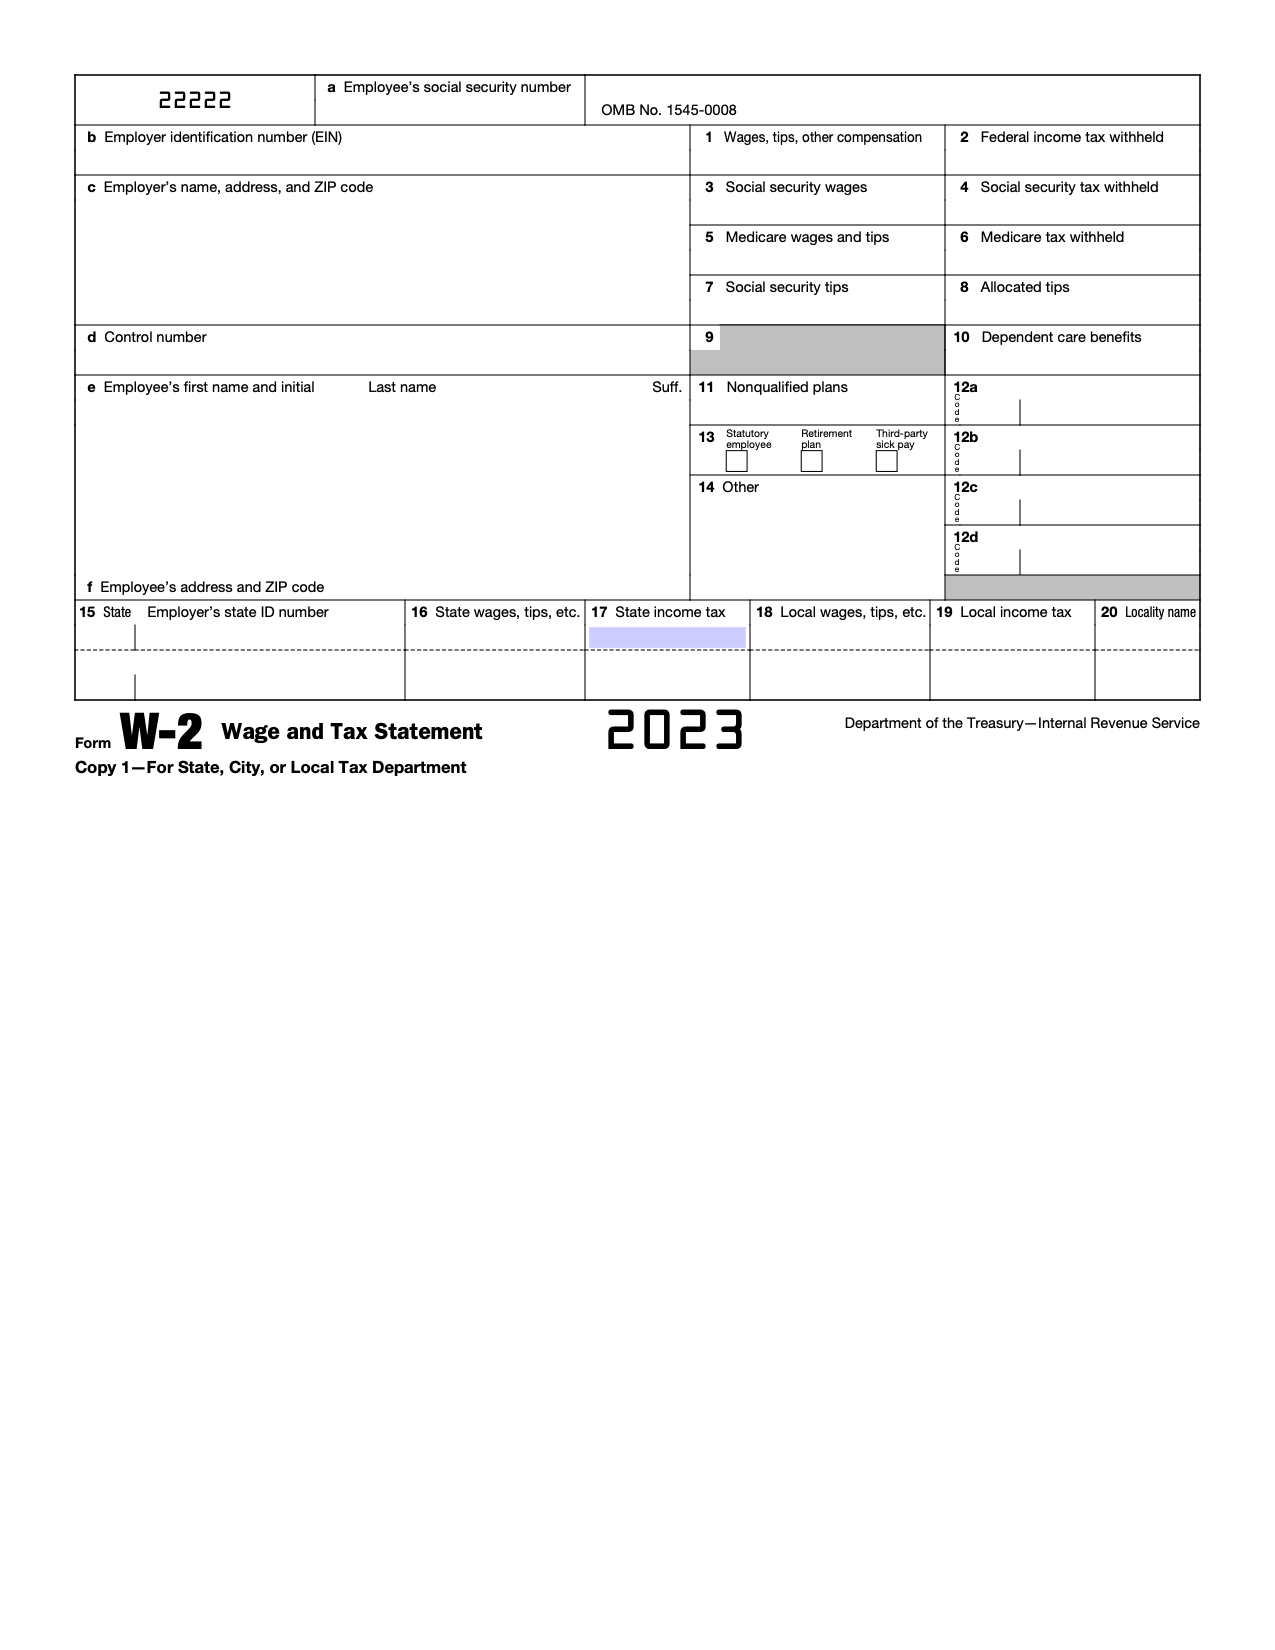 Free Irs Form W-2 | Wage And Tax Statement - Pdf – Eforms in Where Can I Get Blank W2 Forms